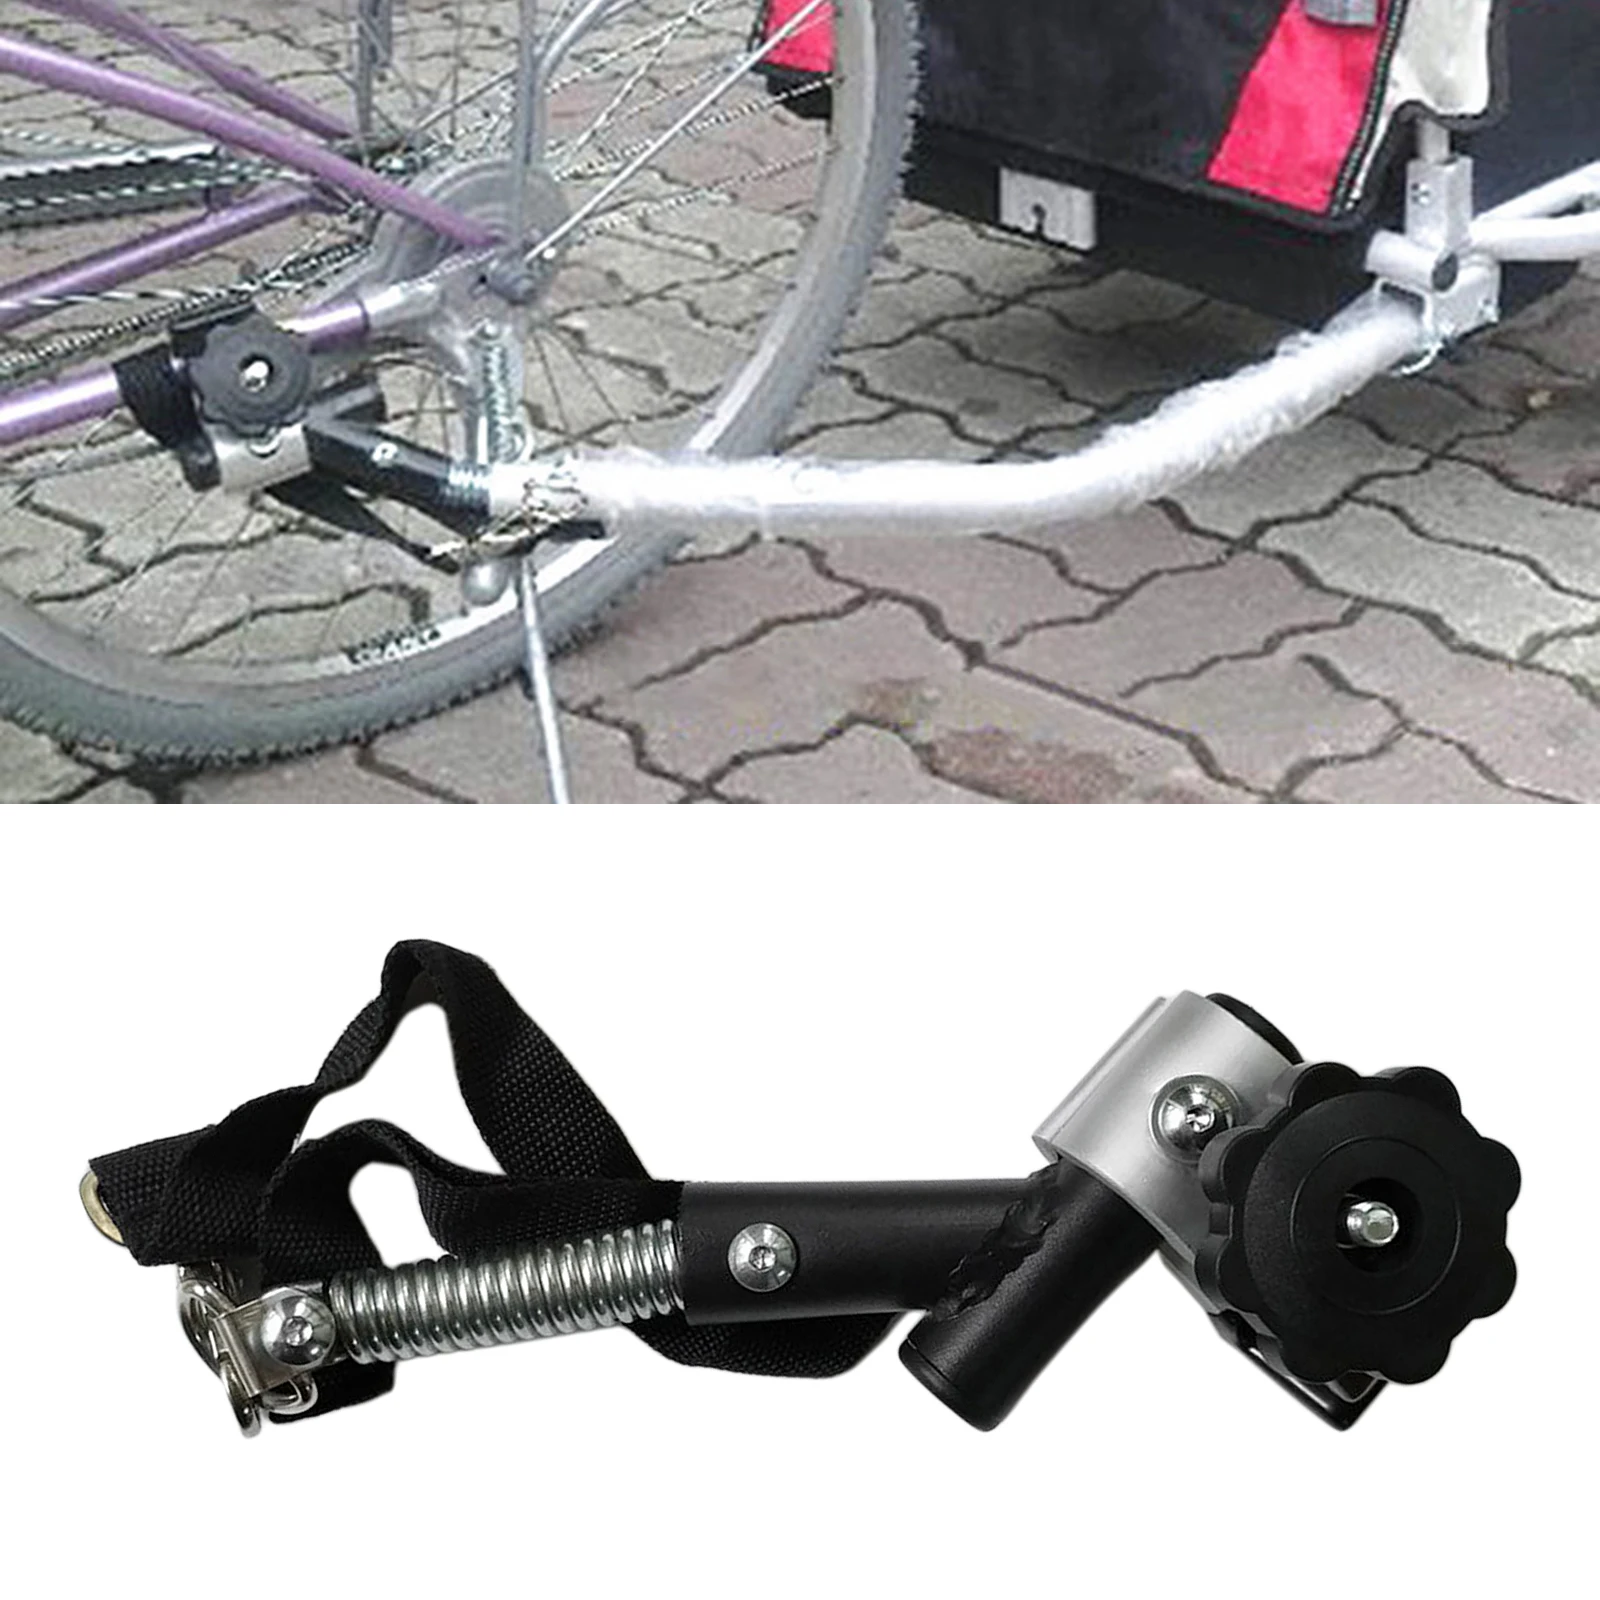 LIOOBO Universal Bicycle Bike Trailer Hitch Quick Release Metal Steel Linker MTB Trailer Hitch Adapter Attachment 